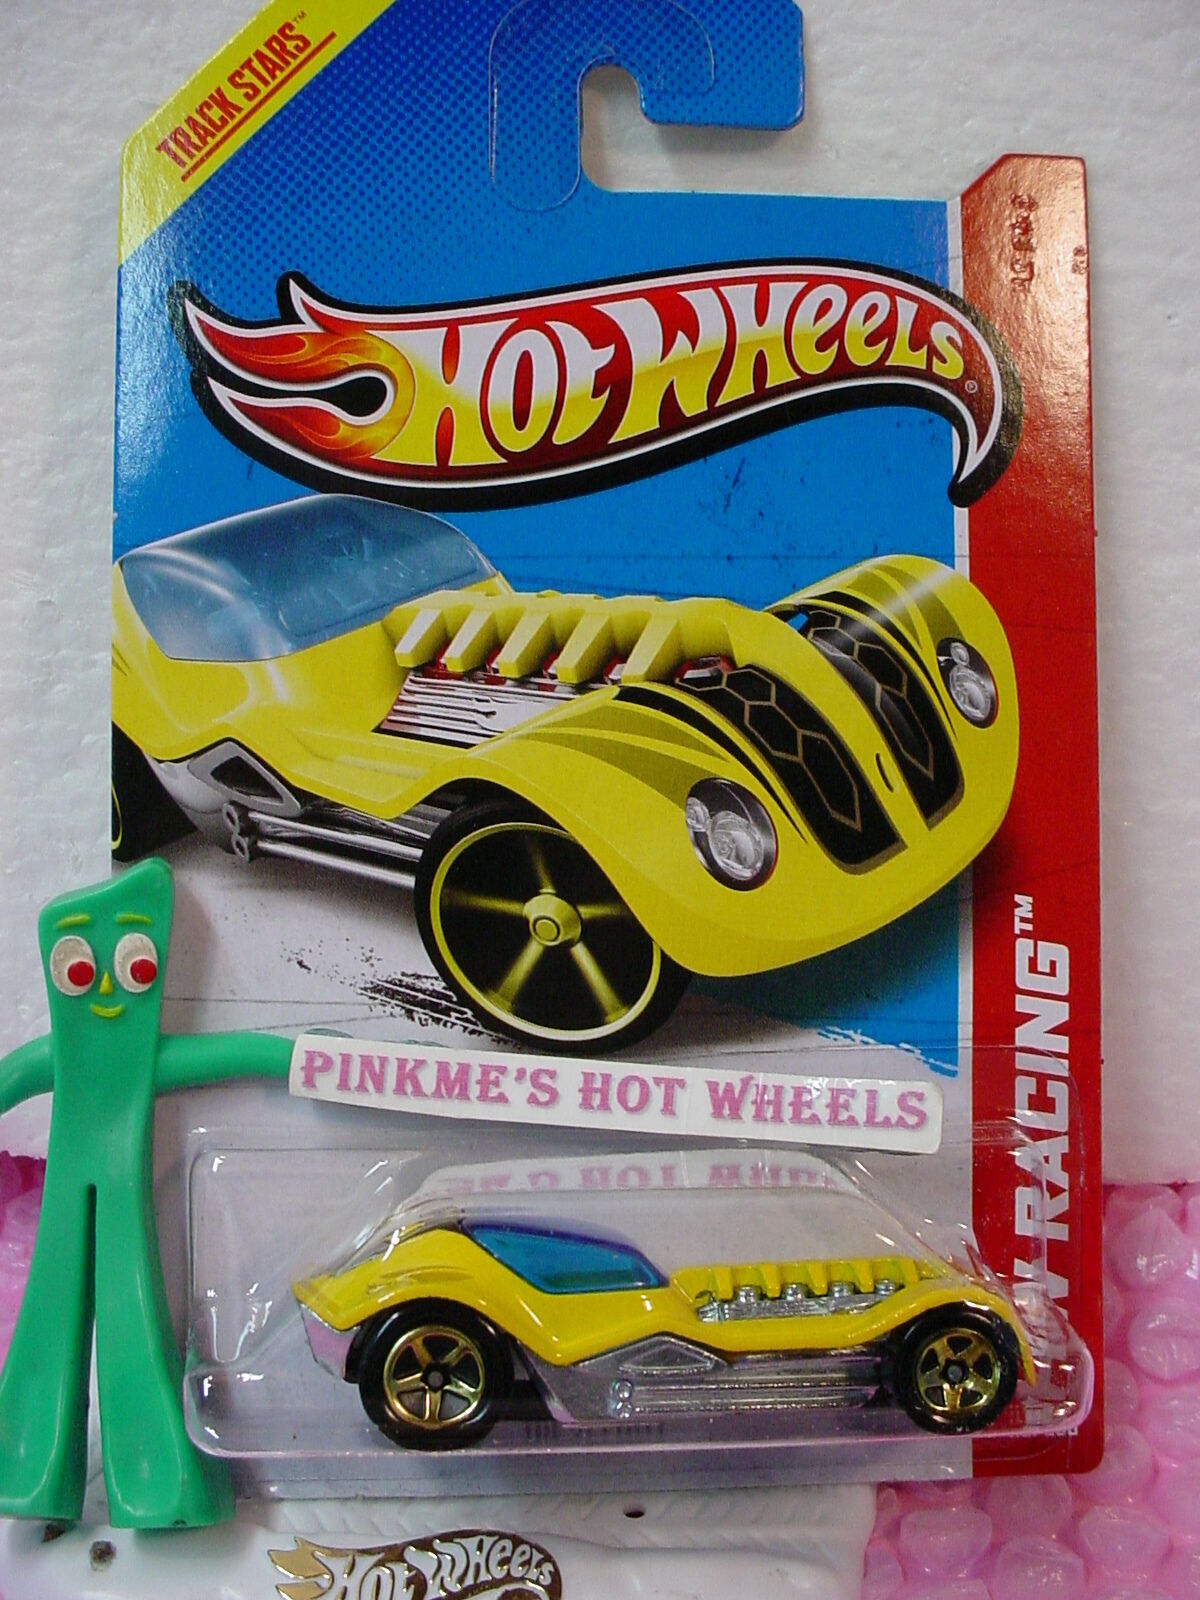 2013 i Hot Wheels DIESELBOY #113 ☆Yellow ; g5sp☆HW Racing☆Thrill Racers☆Case G 